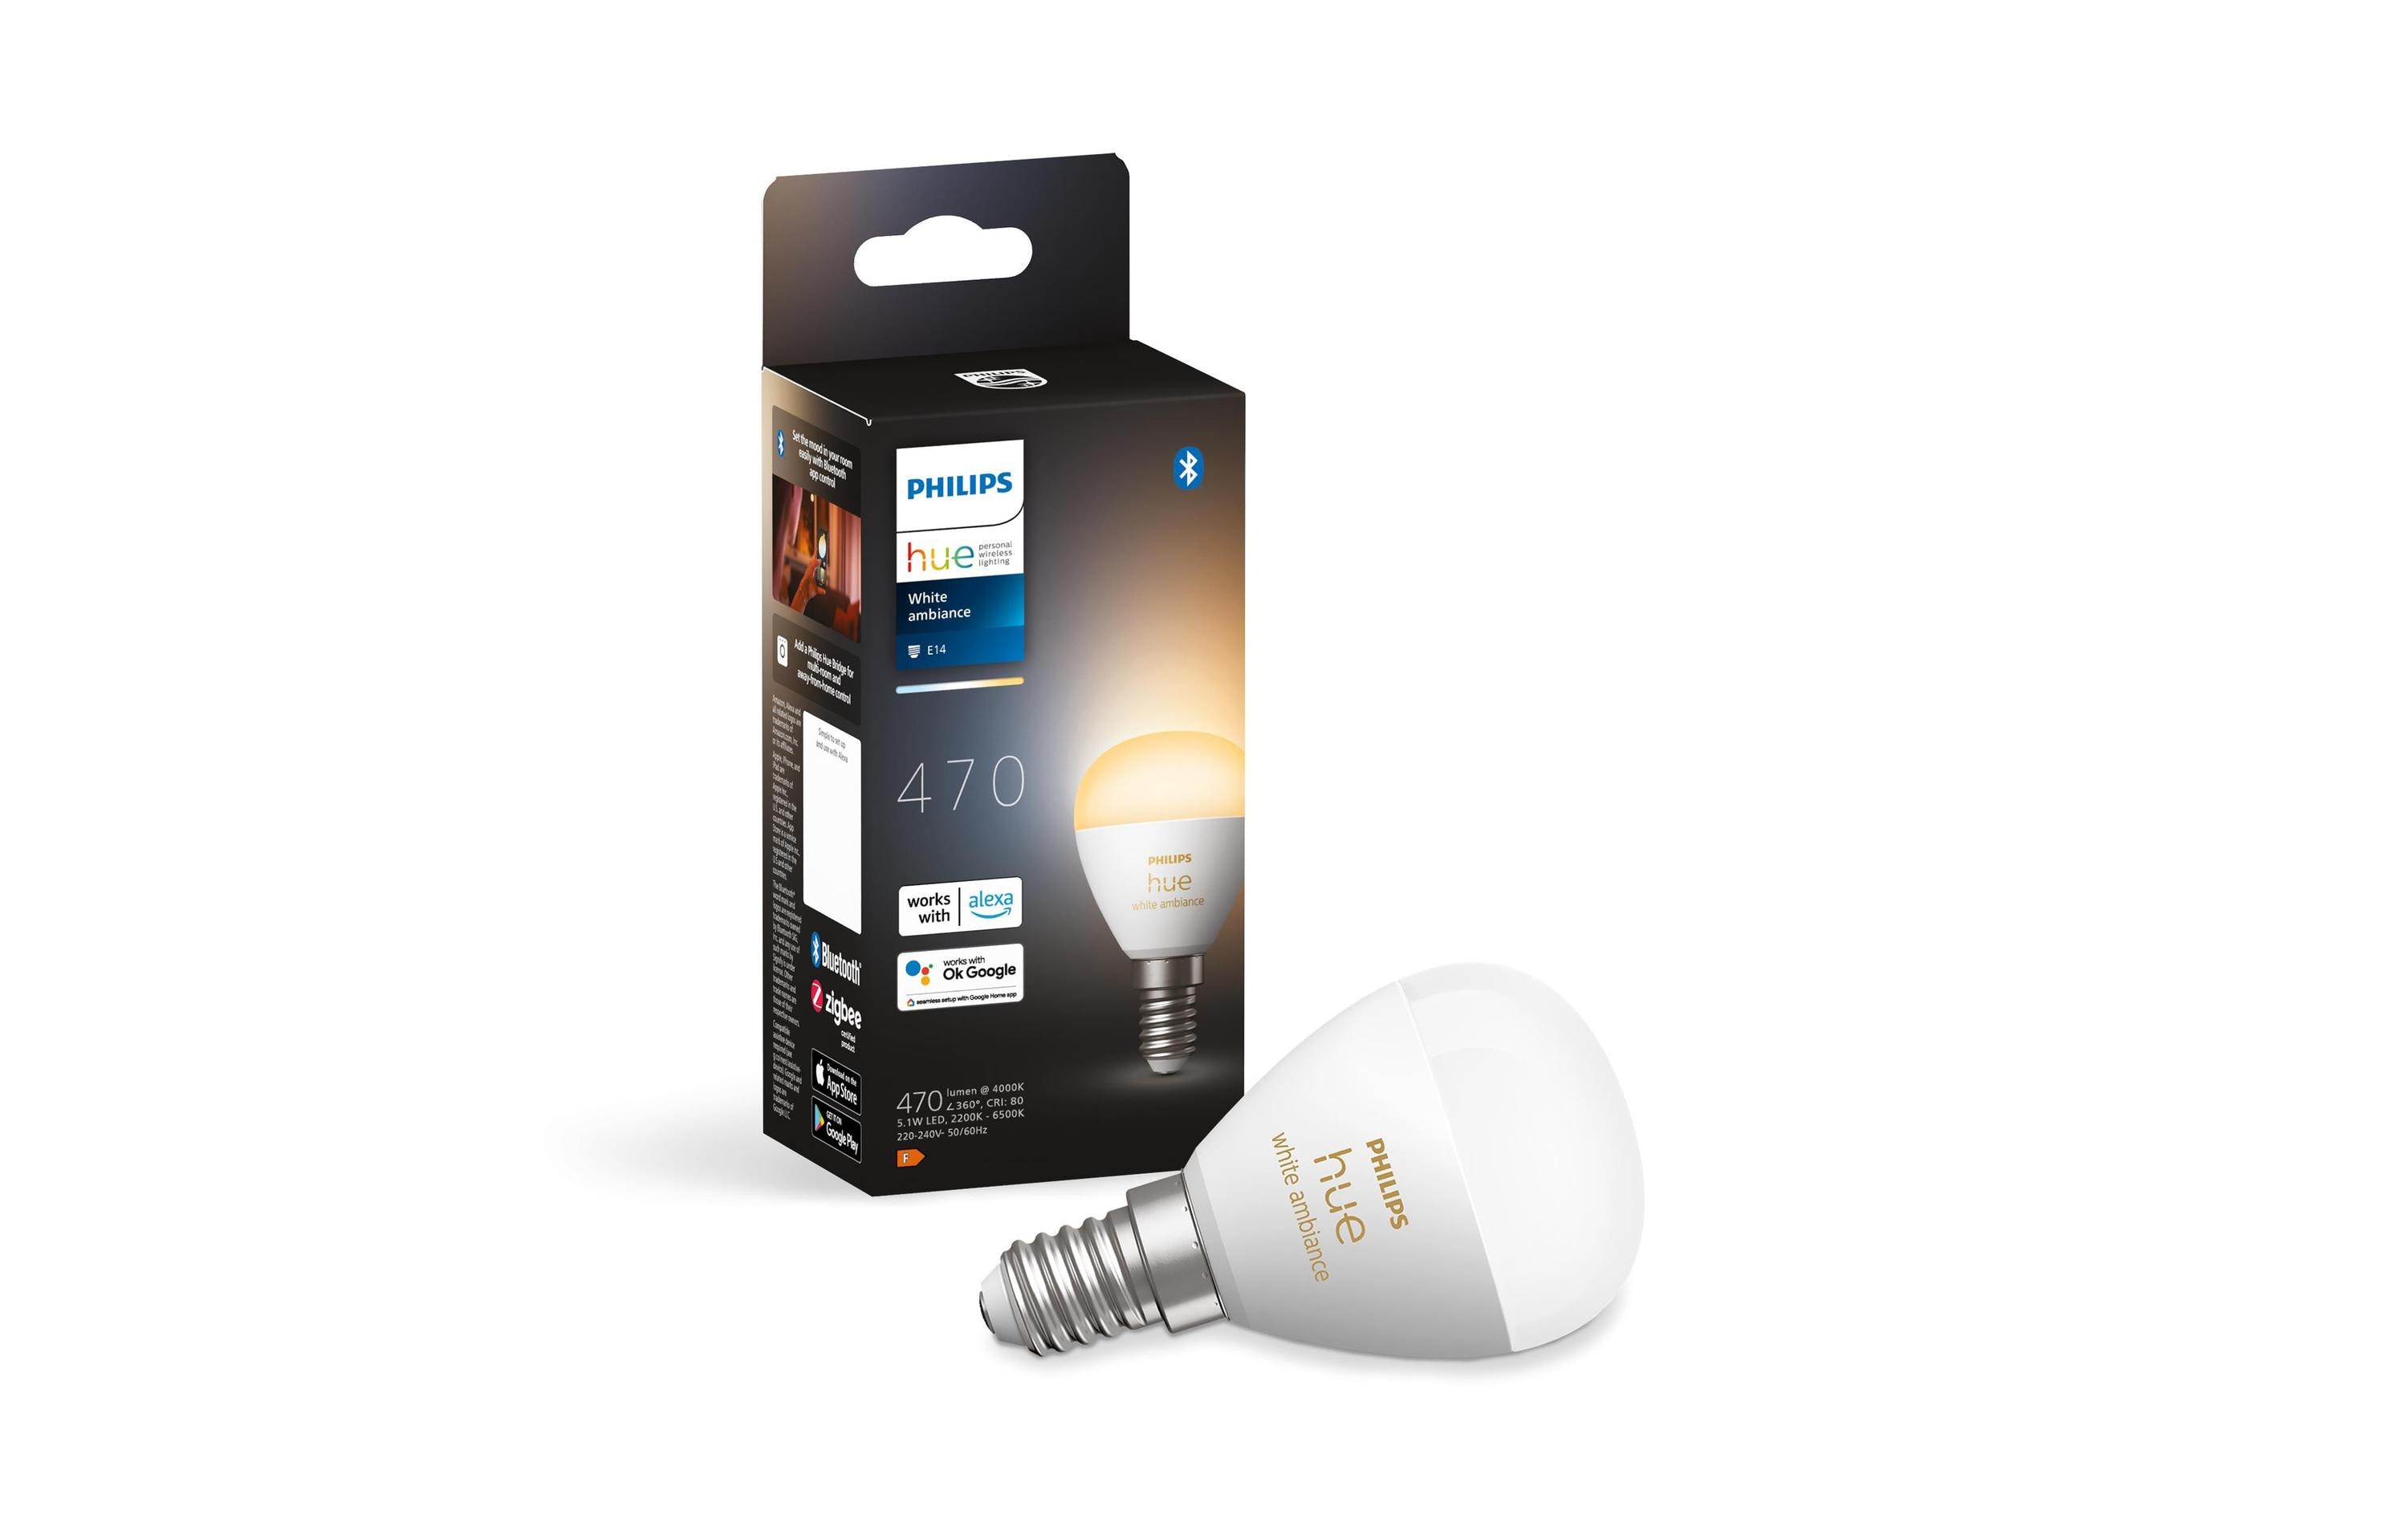 Philips Hue White Ambiance E14 Luster Tropfenform 470 lm